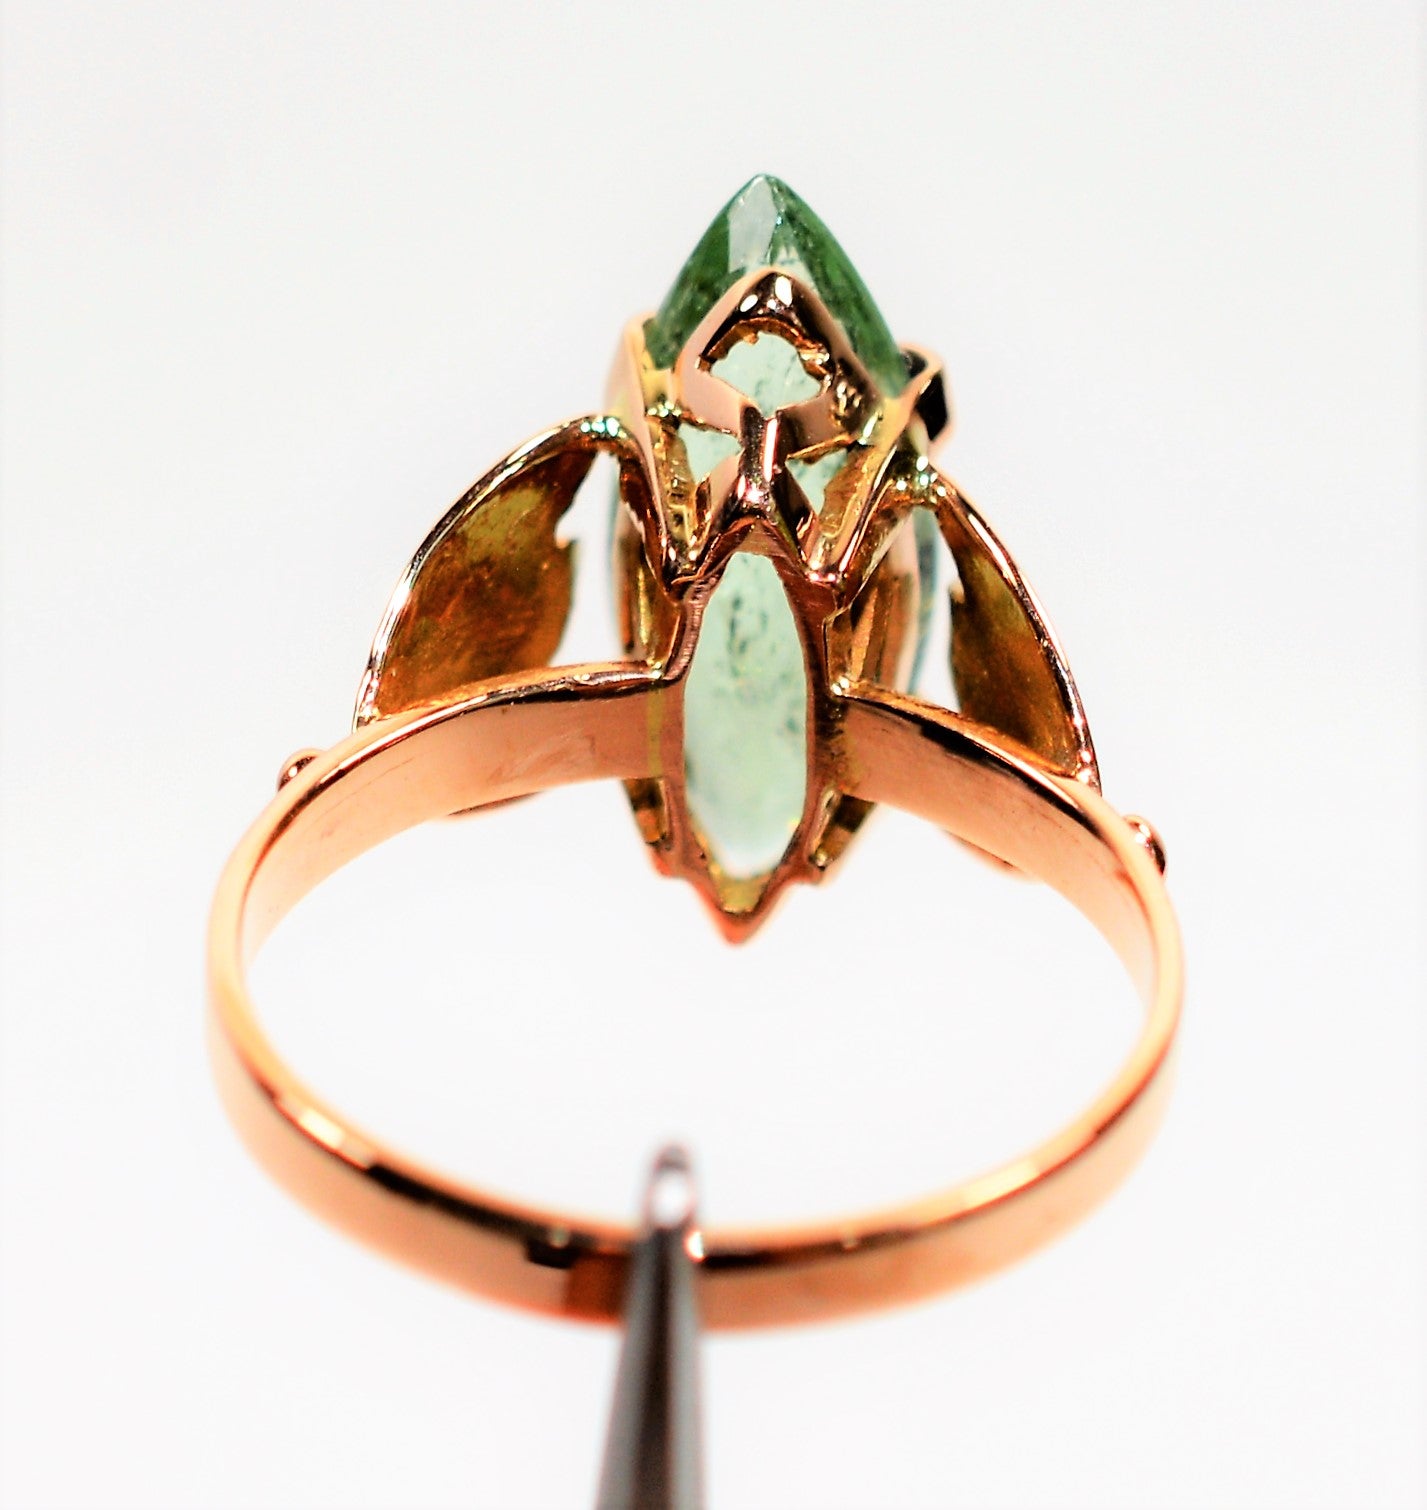 Certified Natural Paraiba Tourmaline Ring 14K Solid Rose Gold 3.51ct Solitaire Gemstone Statement Fine Estate Jewelry